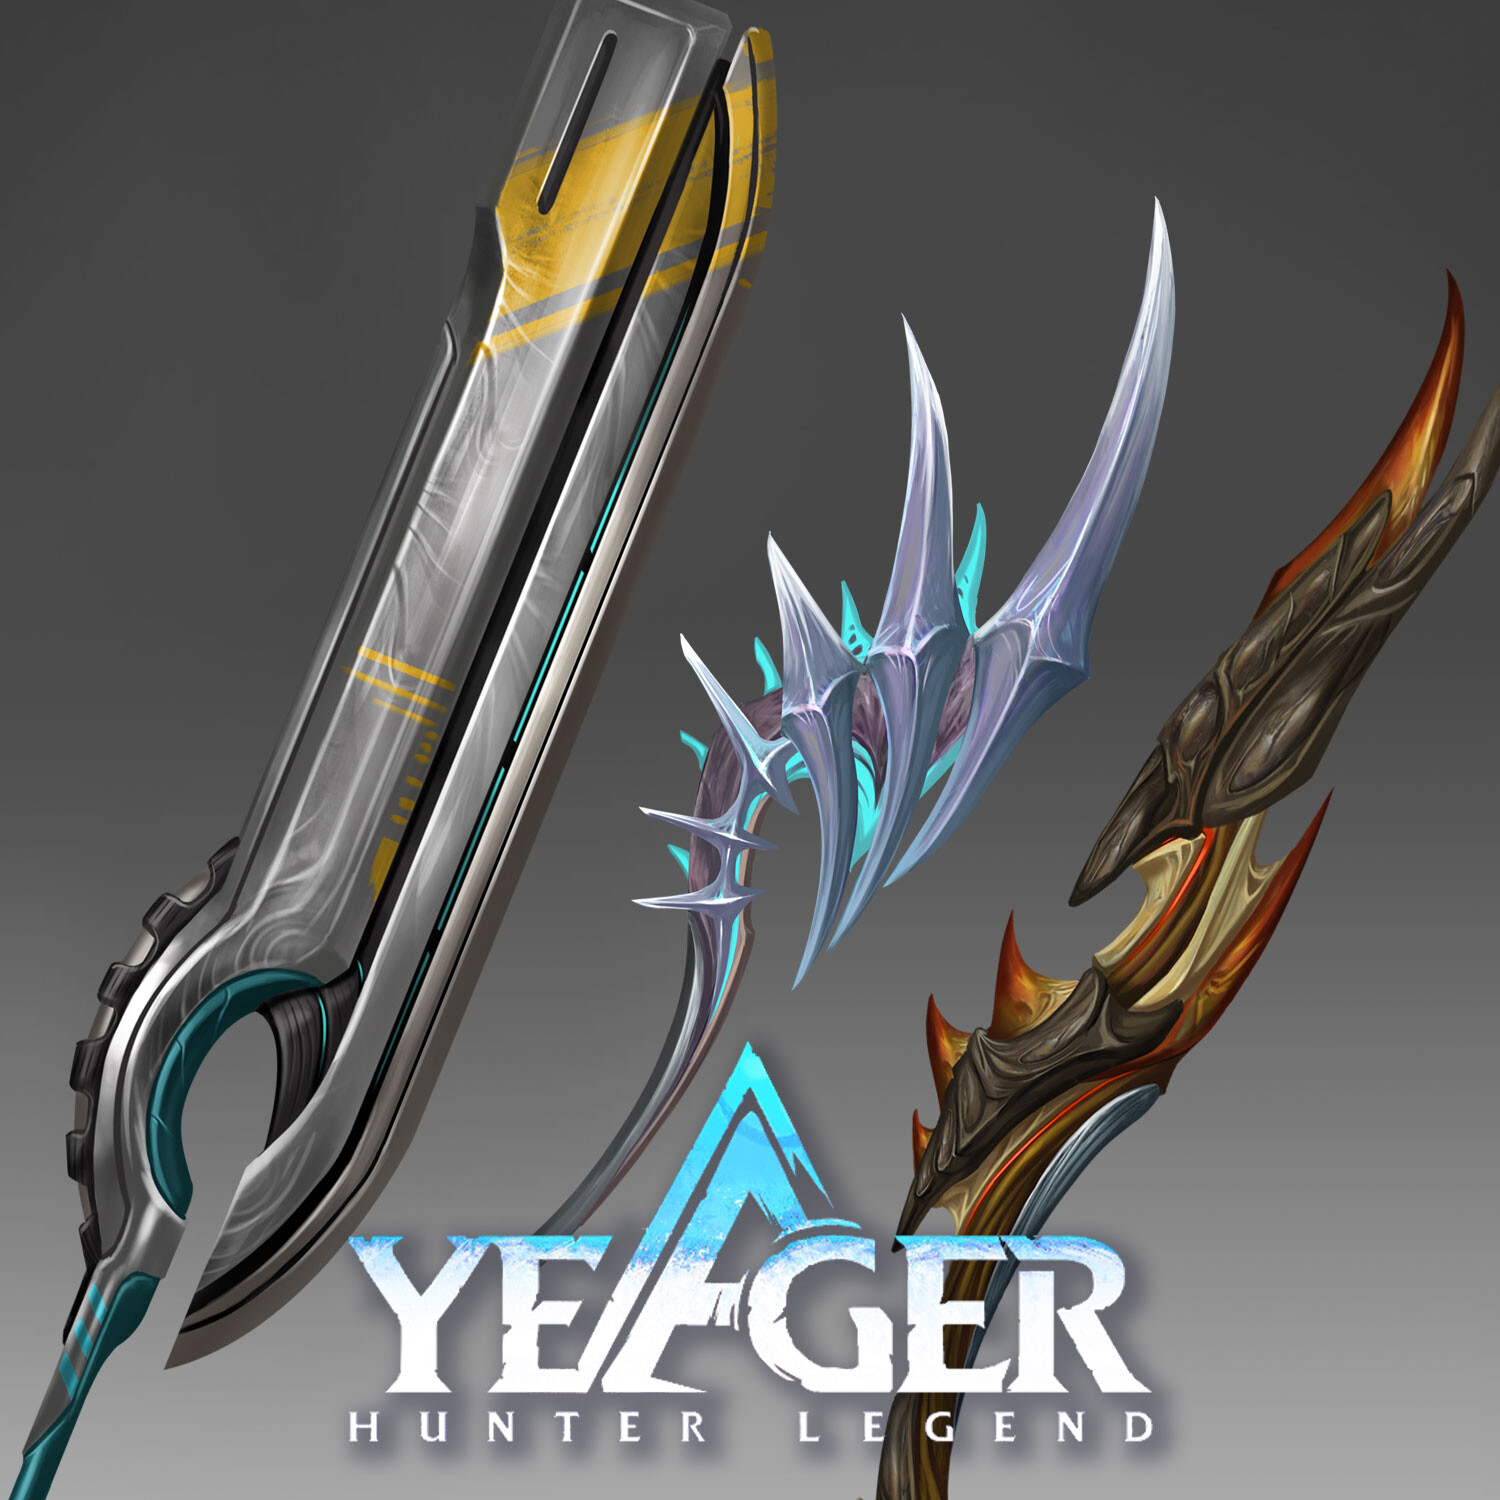 Weapon design - Various creatures edition YEAGER HUNTER LEGEND